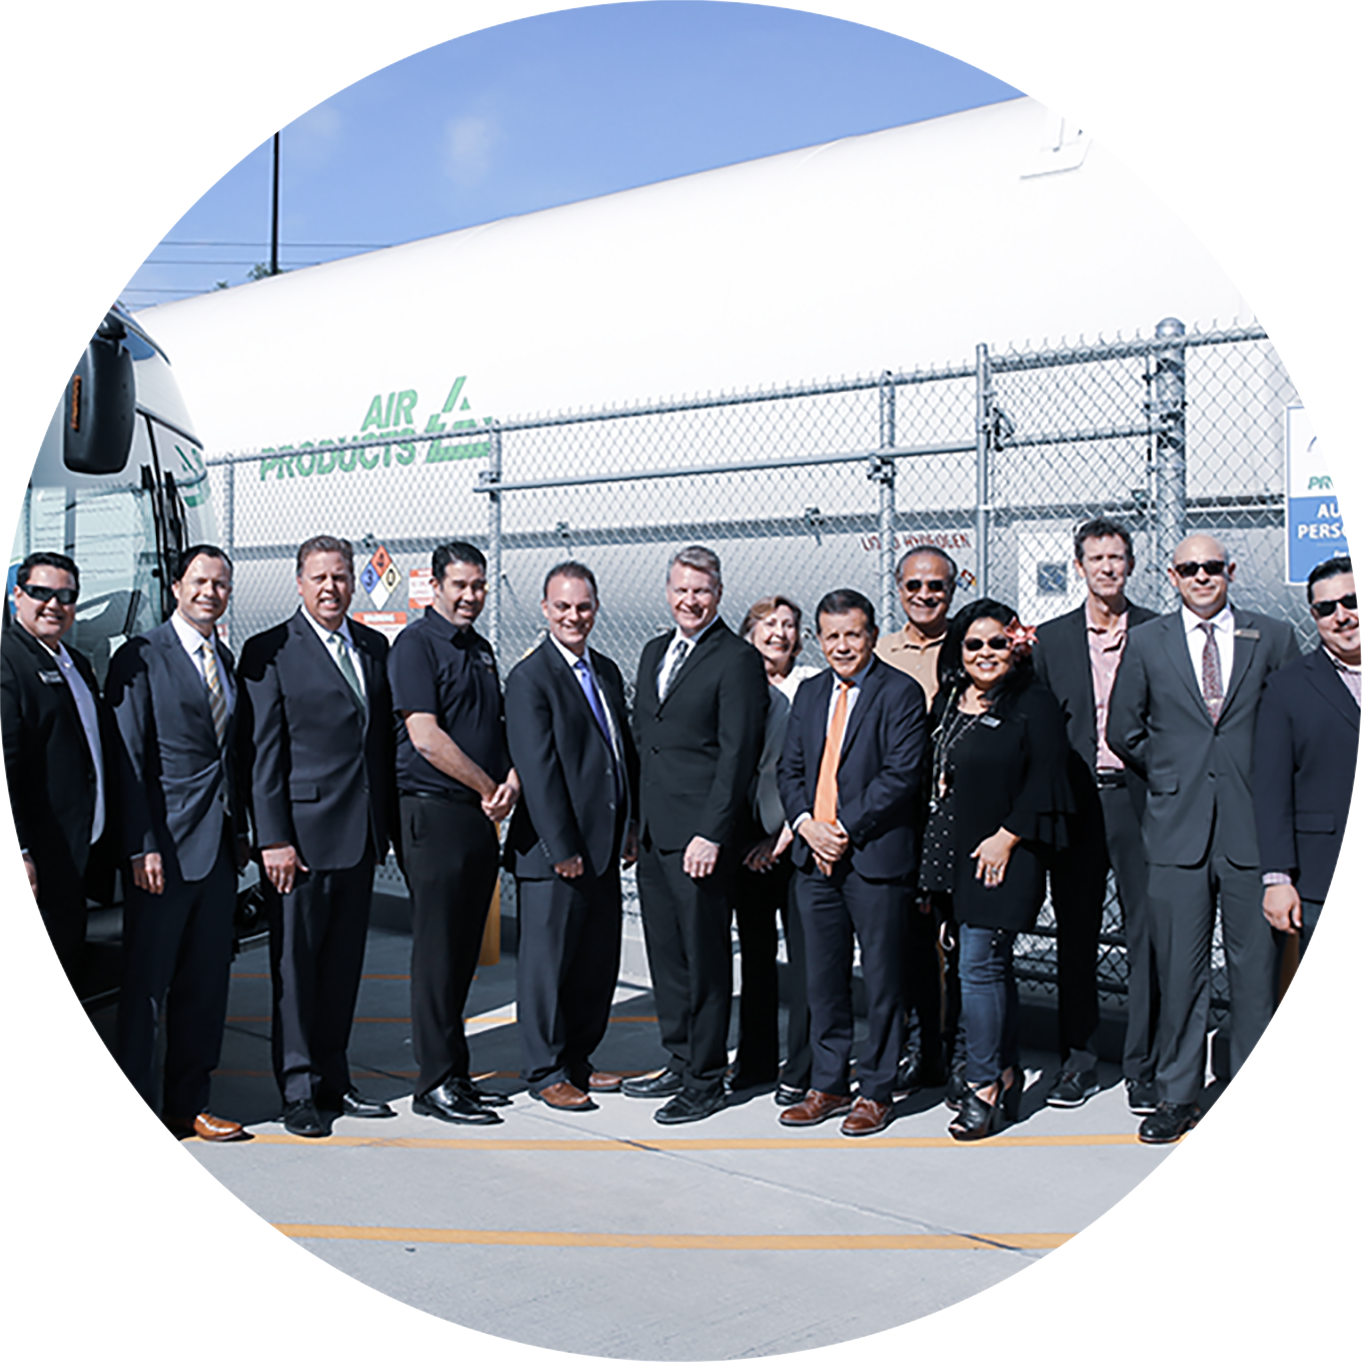 a group of people in suits and ties standing in front of a fenced building with a sign that says air products